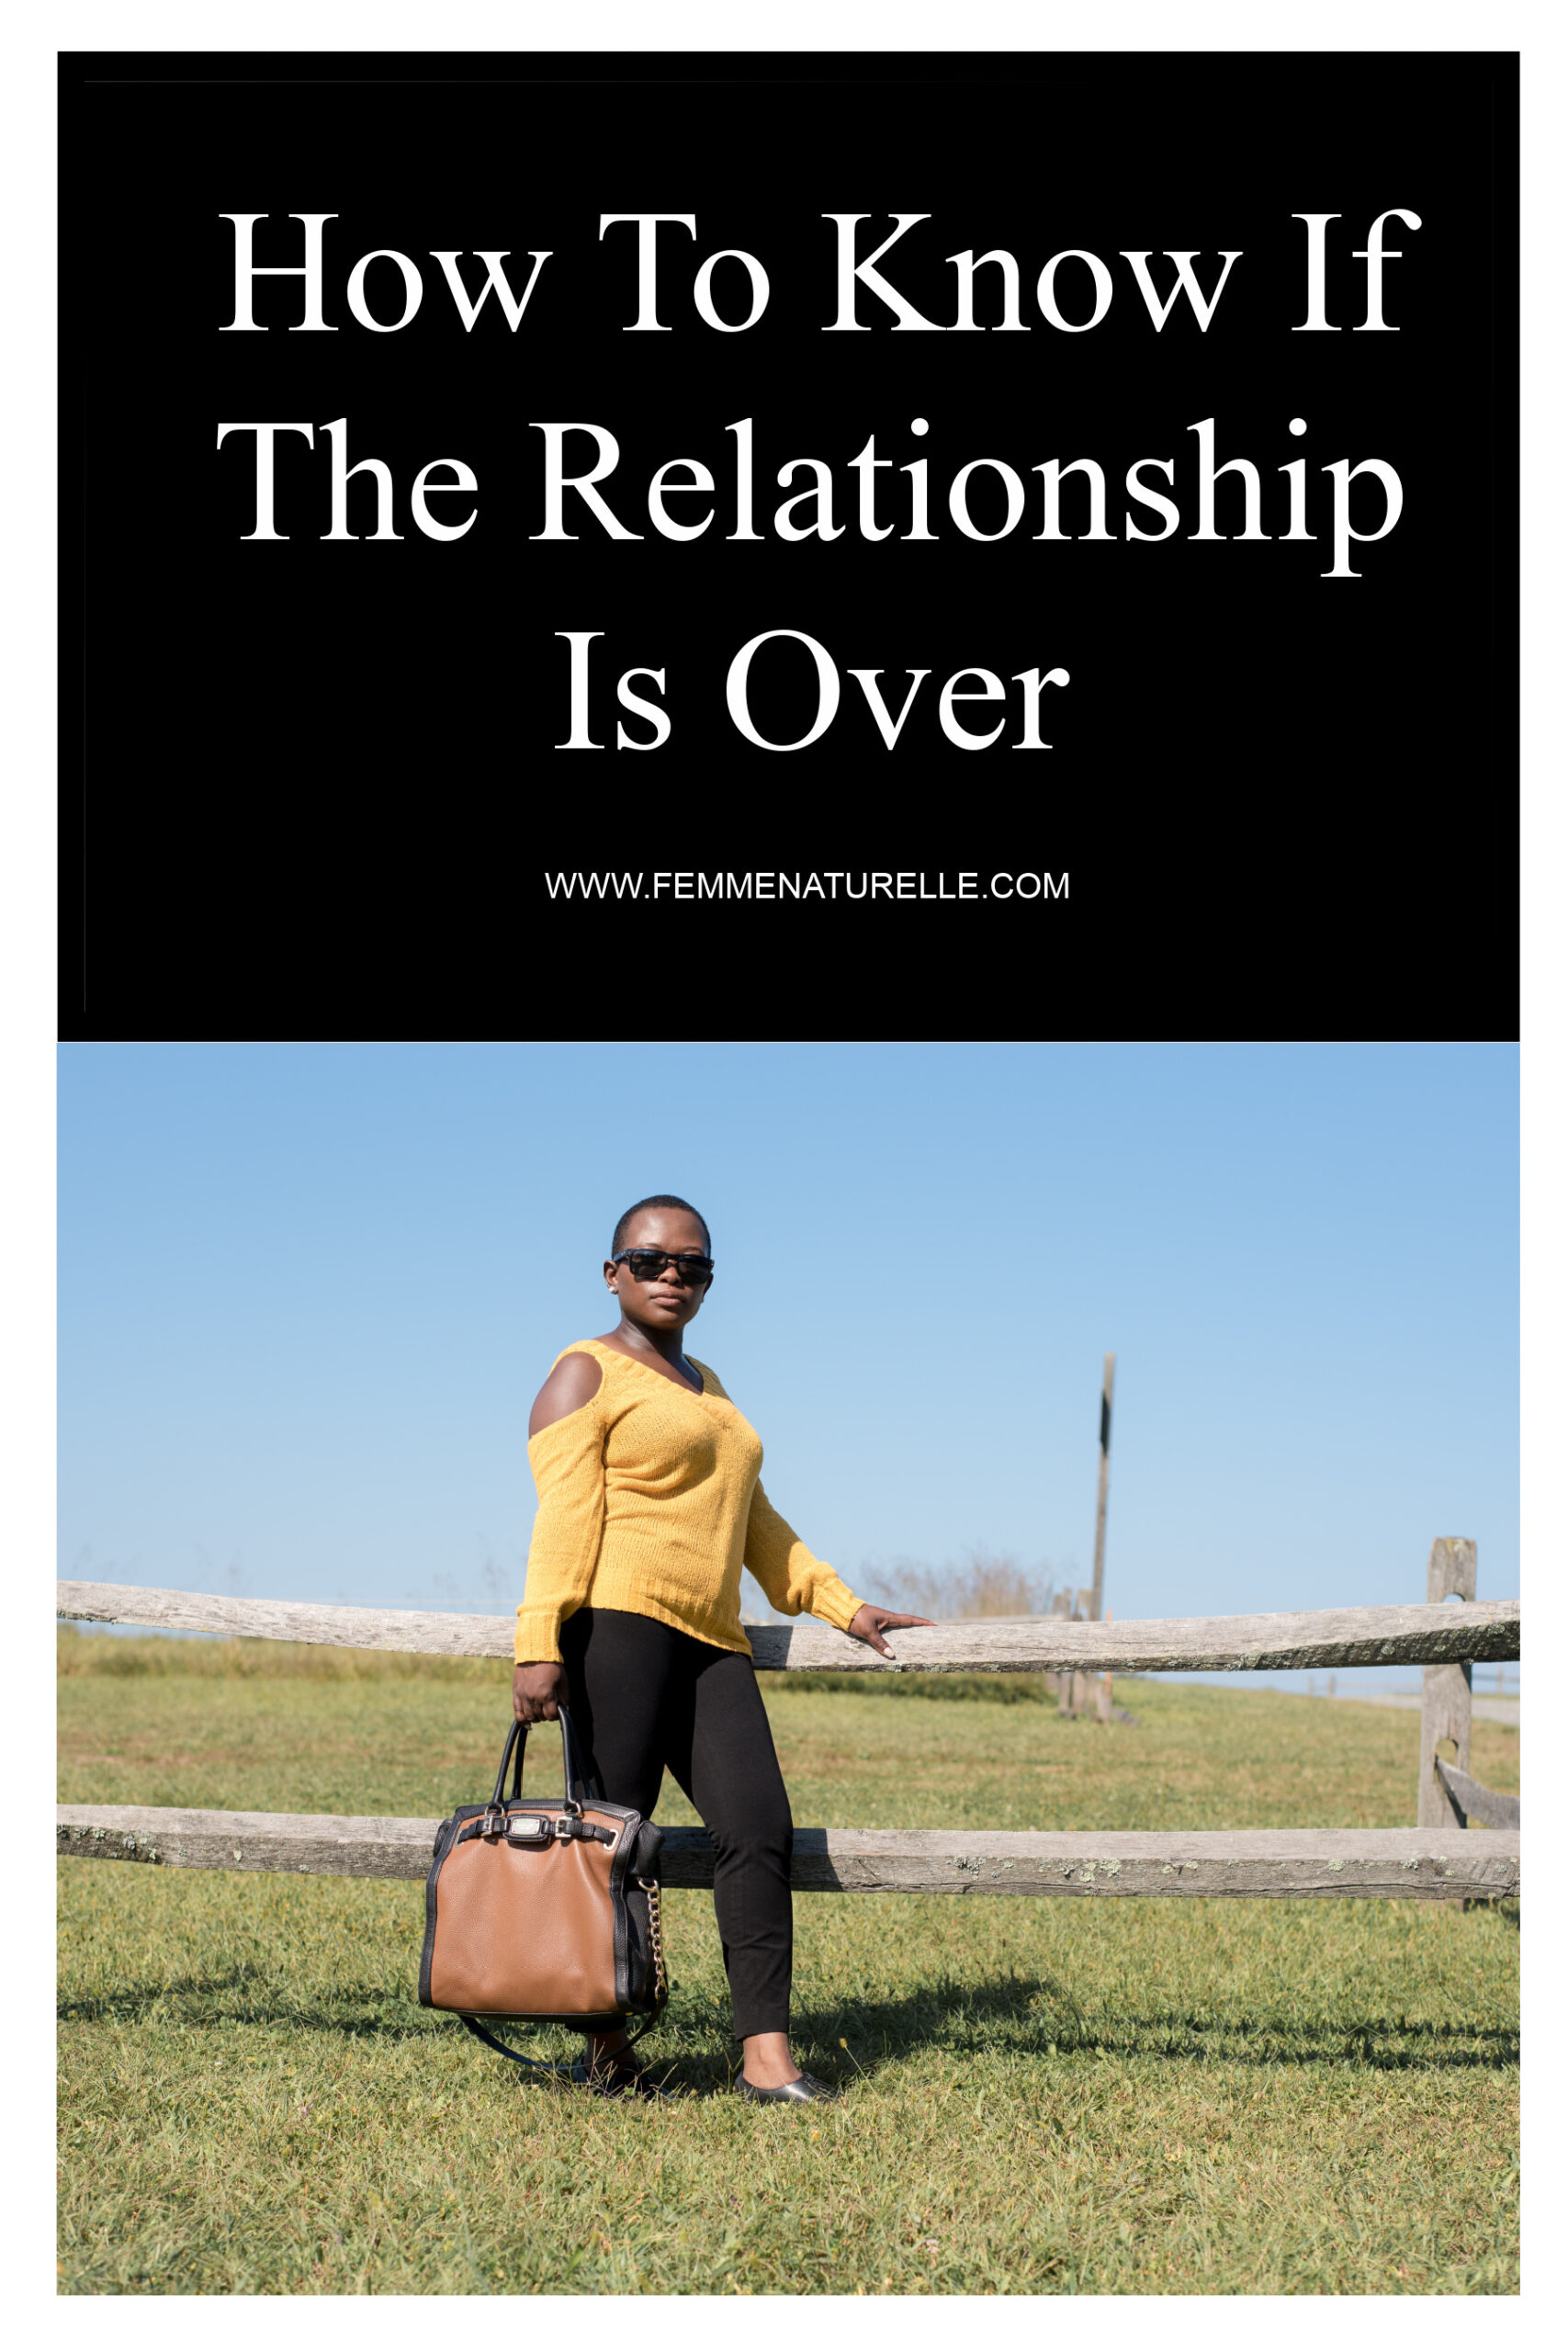 How To Know If The Relationship Is Over